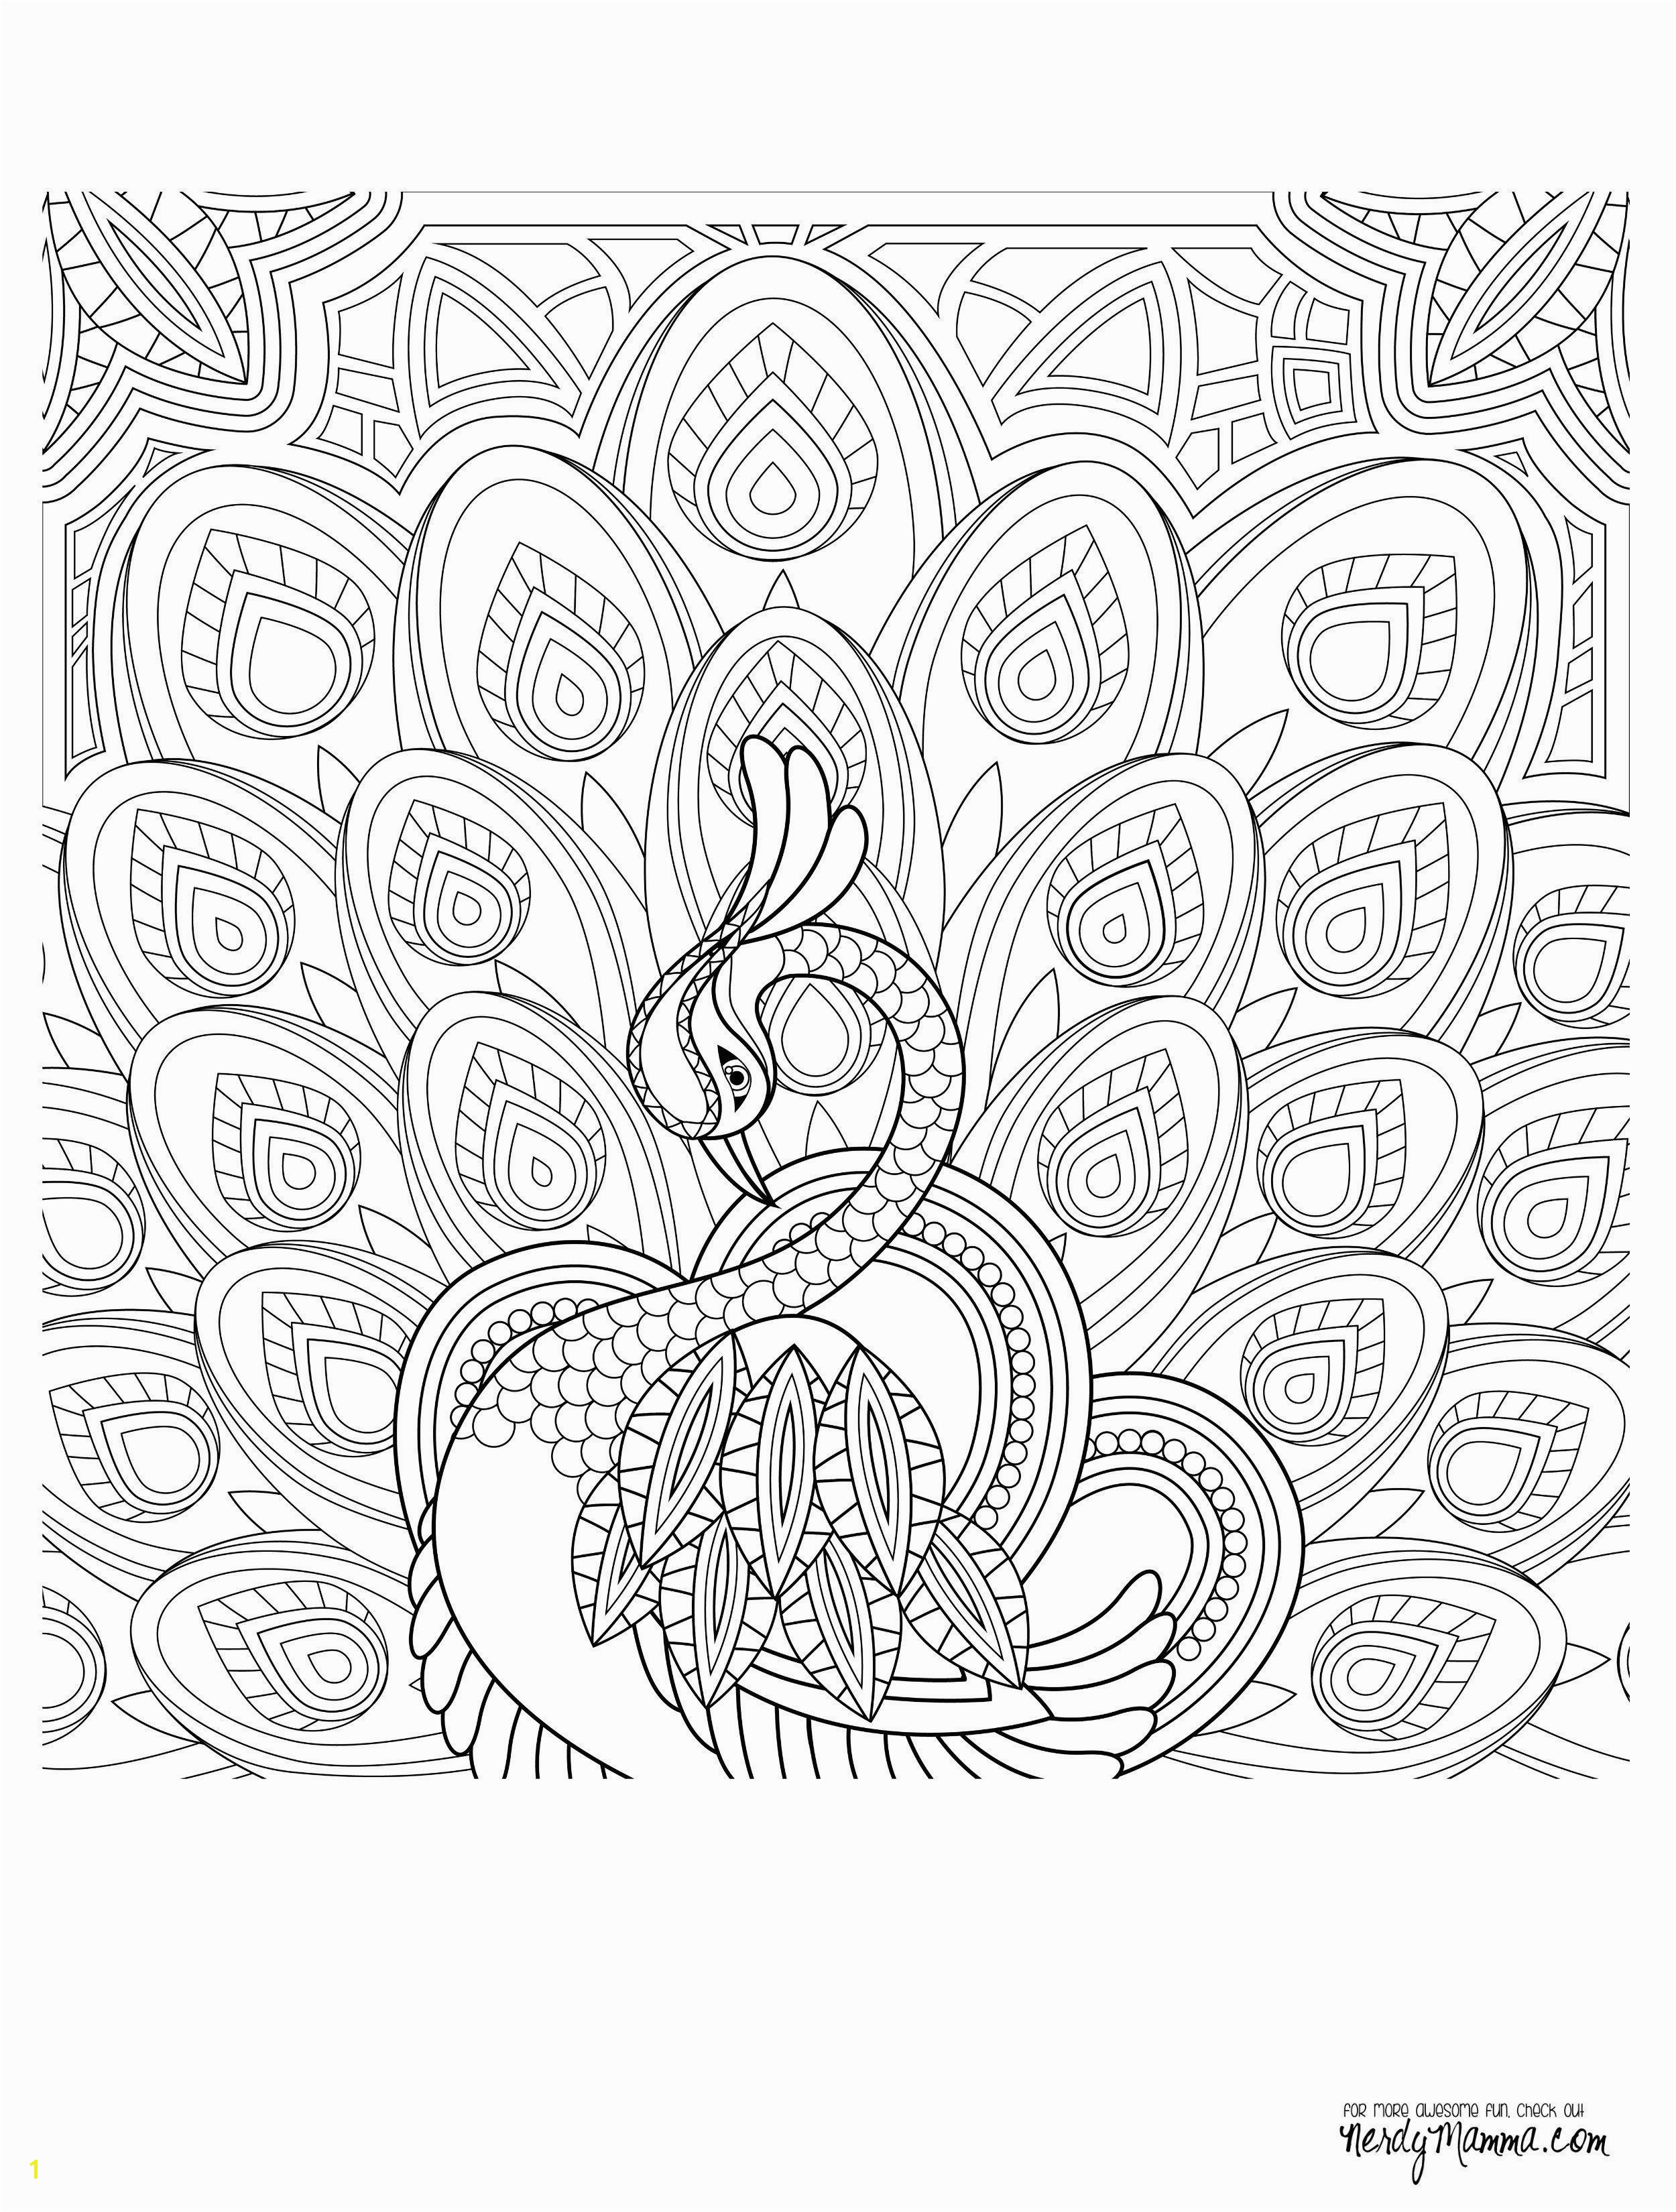 Halloween Coloring Pages Printable Free Coloring Halloween Coloring Pages Websites 29 Free 0d Awesome